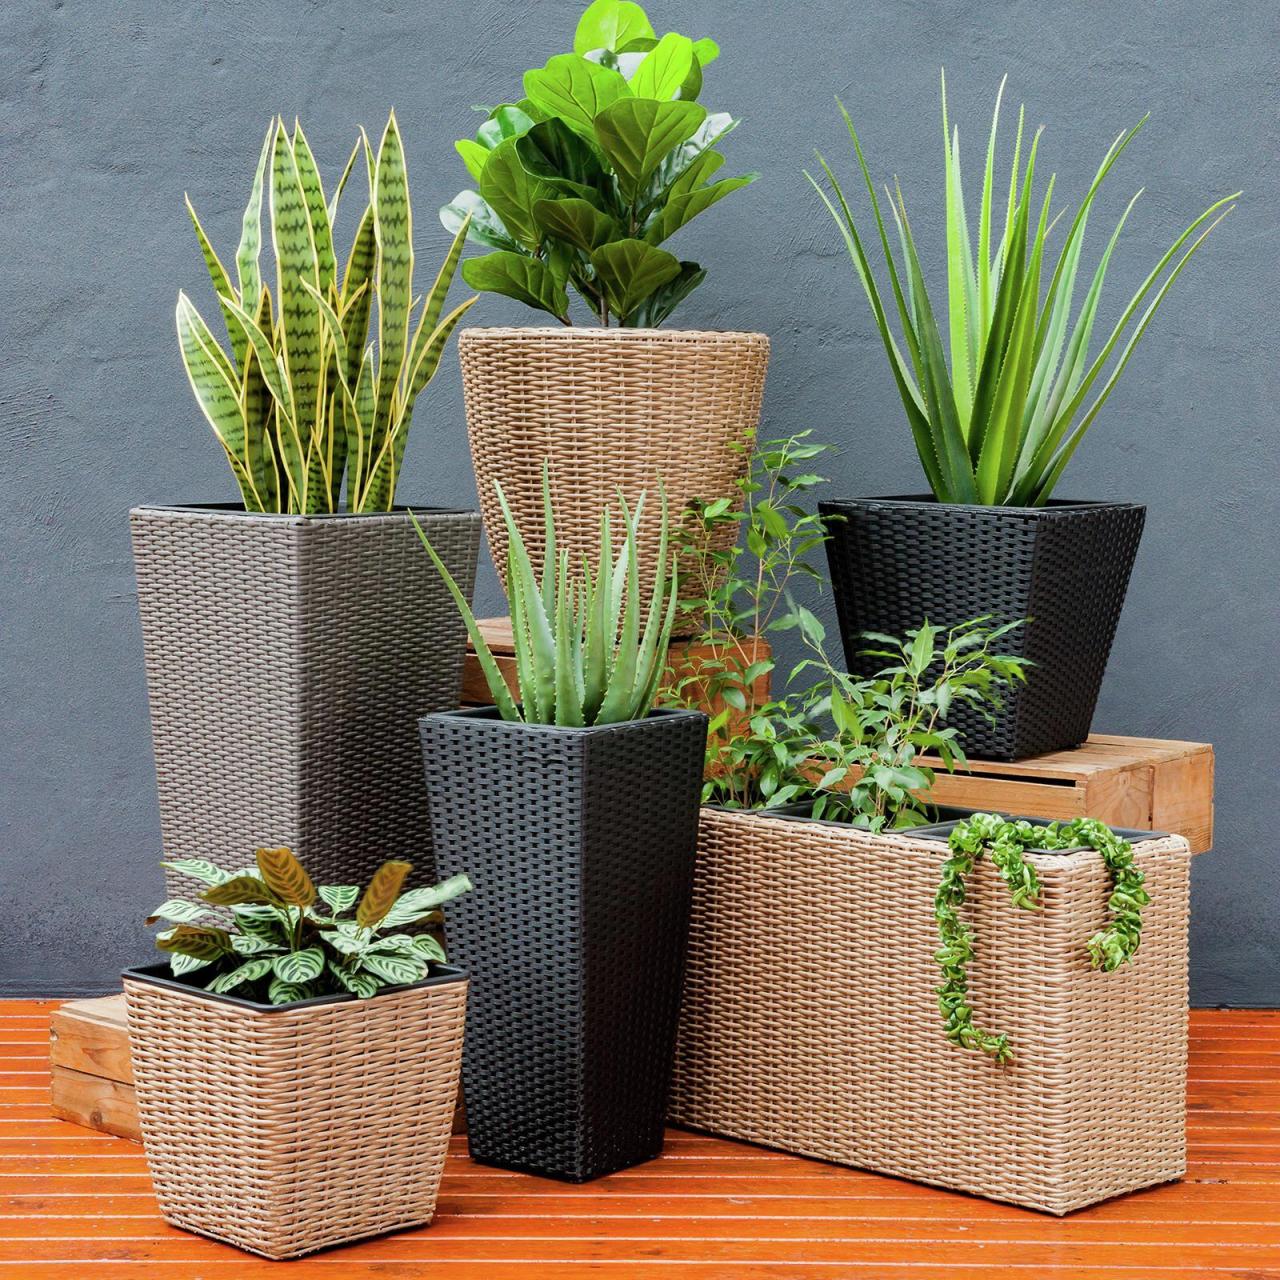 Hanging Plants Indoor | Basket Planter Bunnings: A Guide to Design, Selection, Care, and Display